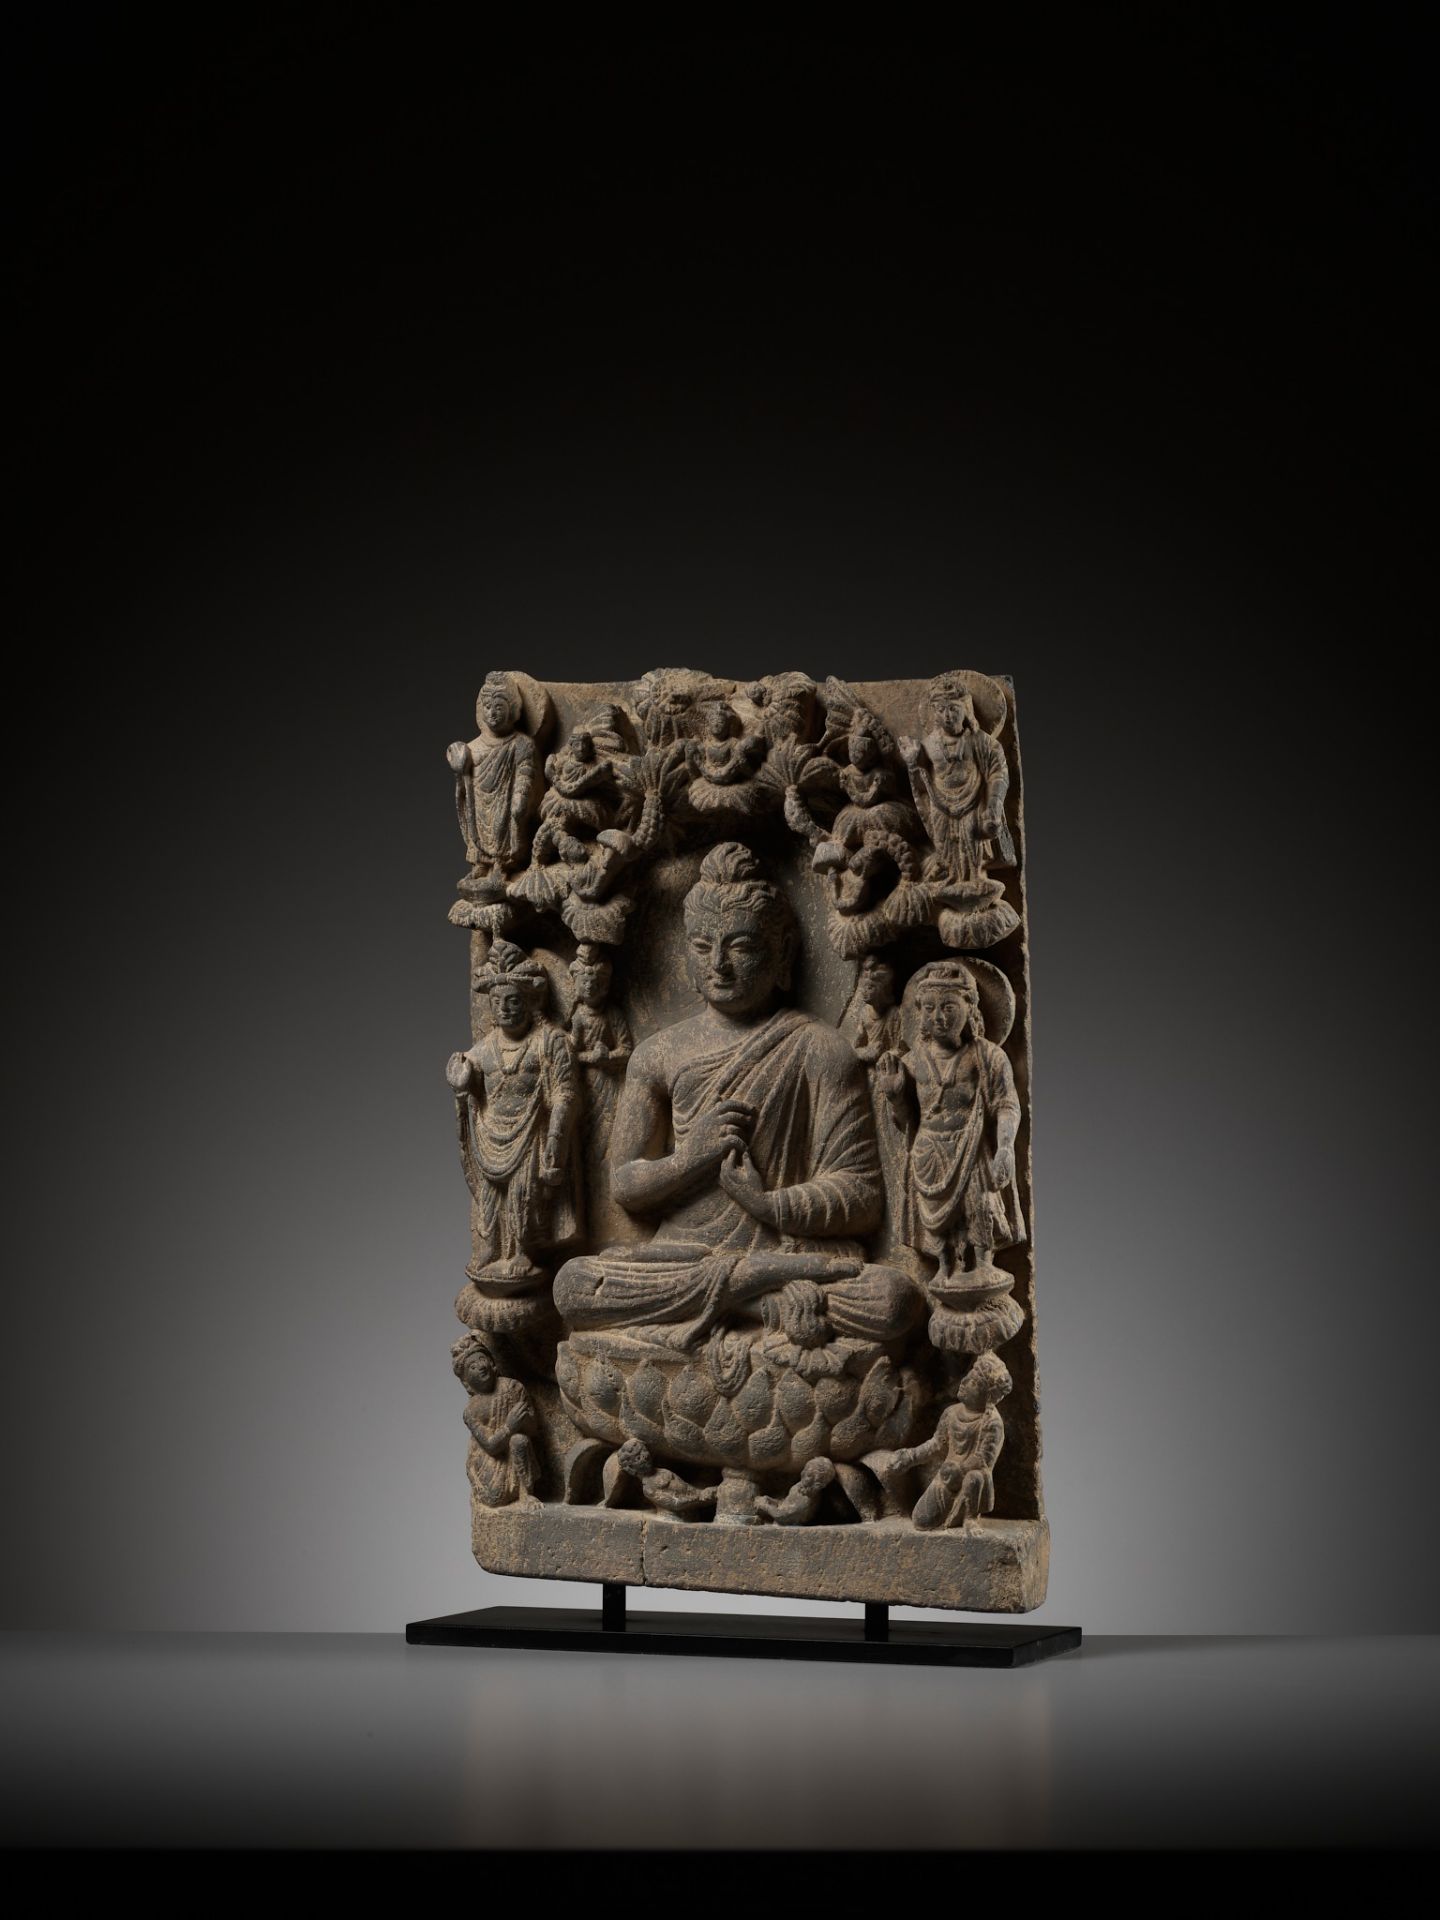 A SCHIST STELE DEPICTING BUDDHA, ANCIENT REGION OF GANDHARA, 3RD-4TH CENTURY - Image 10 of 11